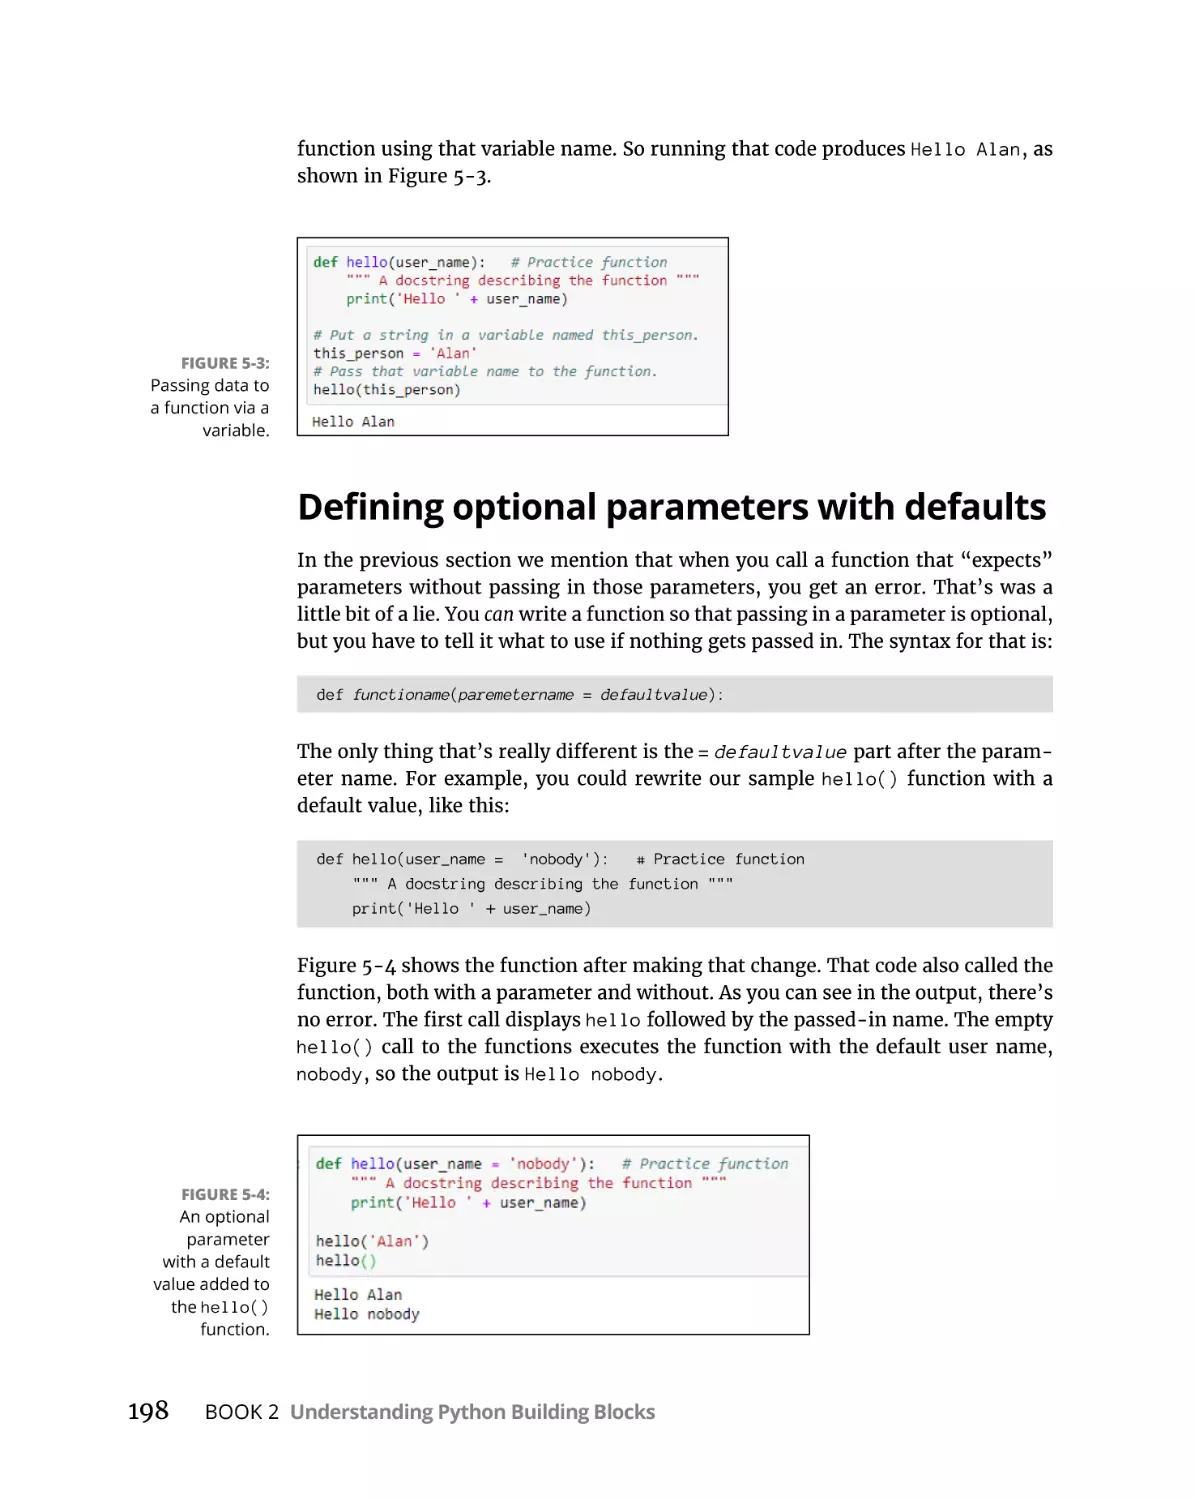 Defining optional parameters with defaults